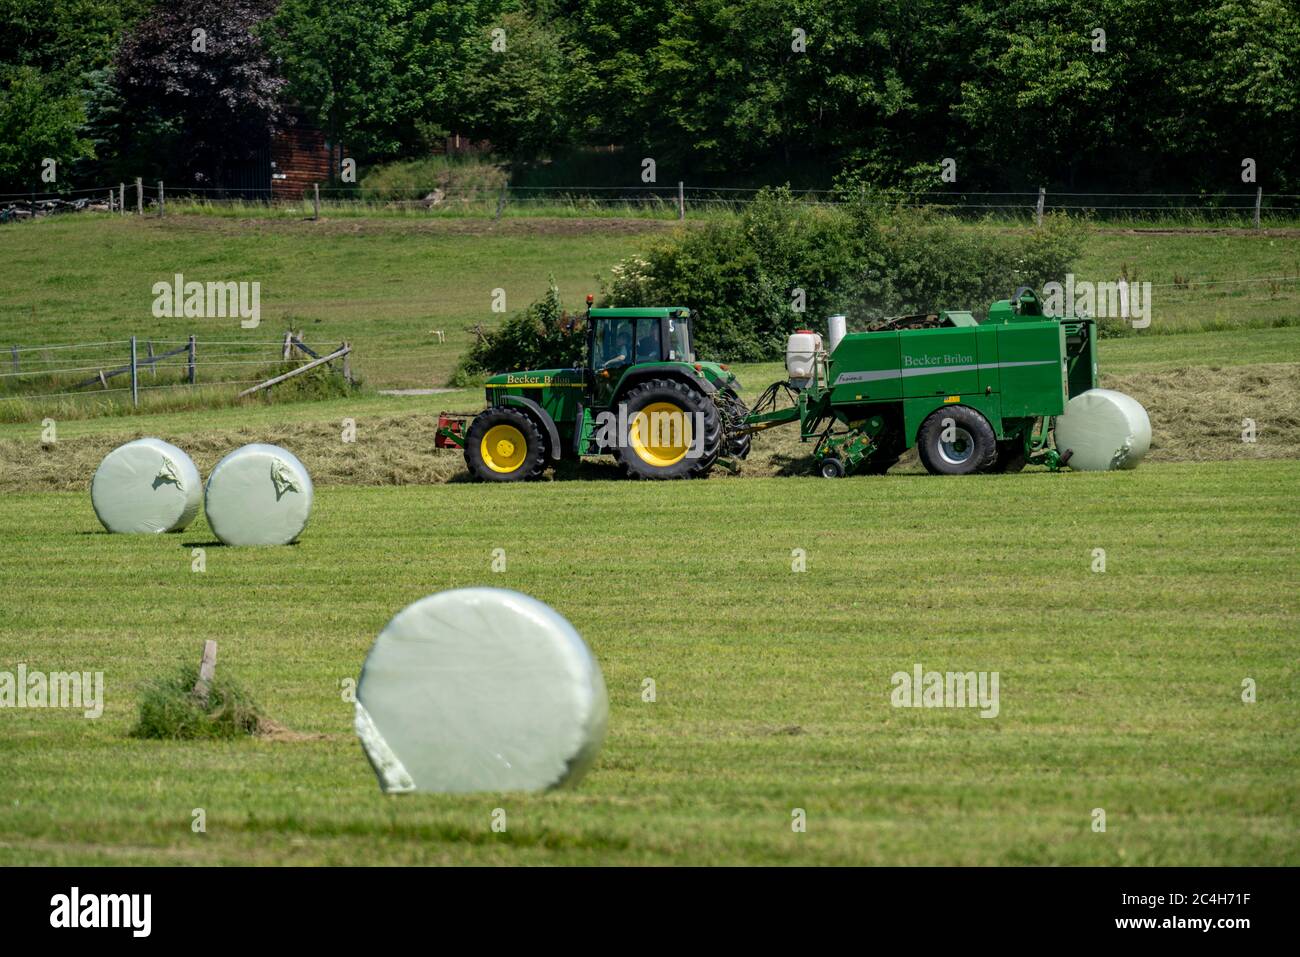 Hay harvest, farmer with agricultural machine, picks up mown hay, which is immediately pressed into bales and wrapped in film, baler/wrapper combinati Stock Photo